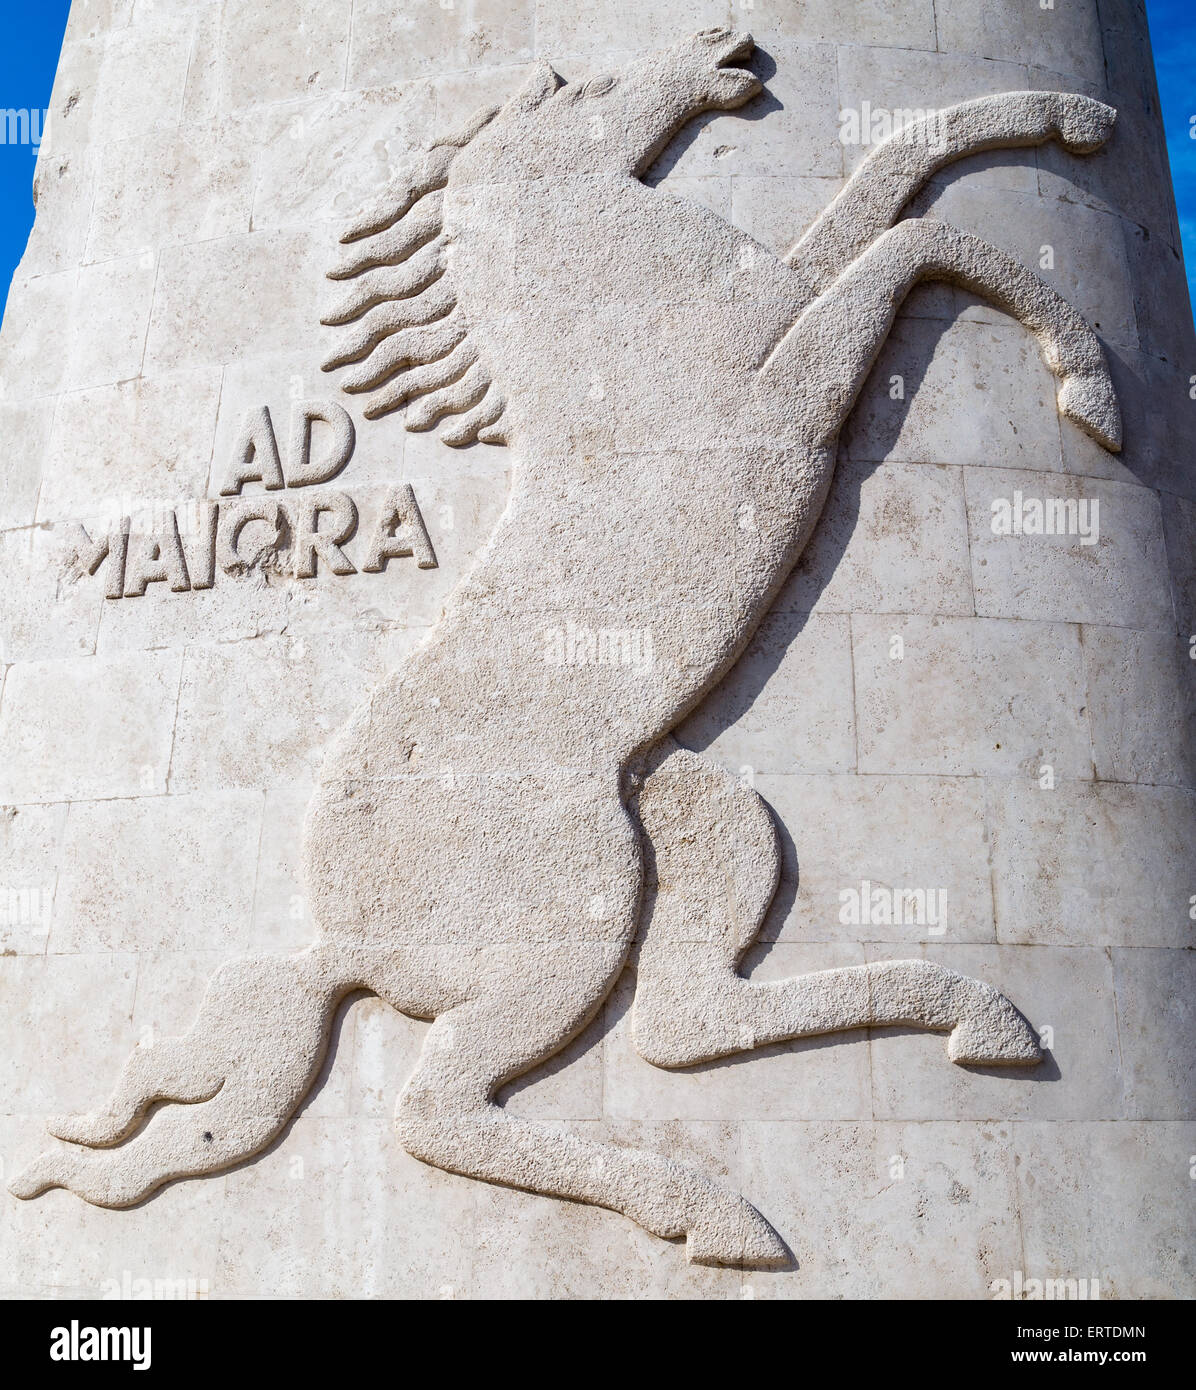 prancing horse with ad maiora sentence embossed in stone Stock Photo